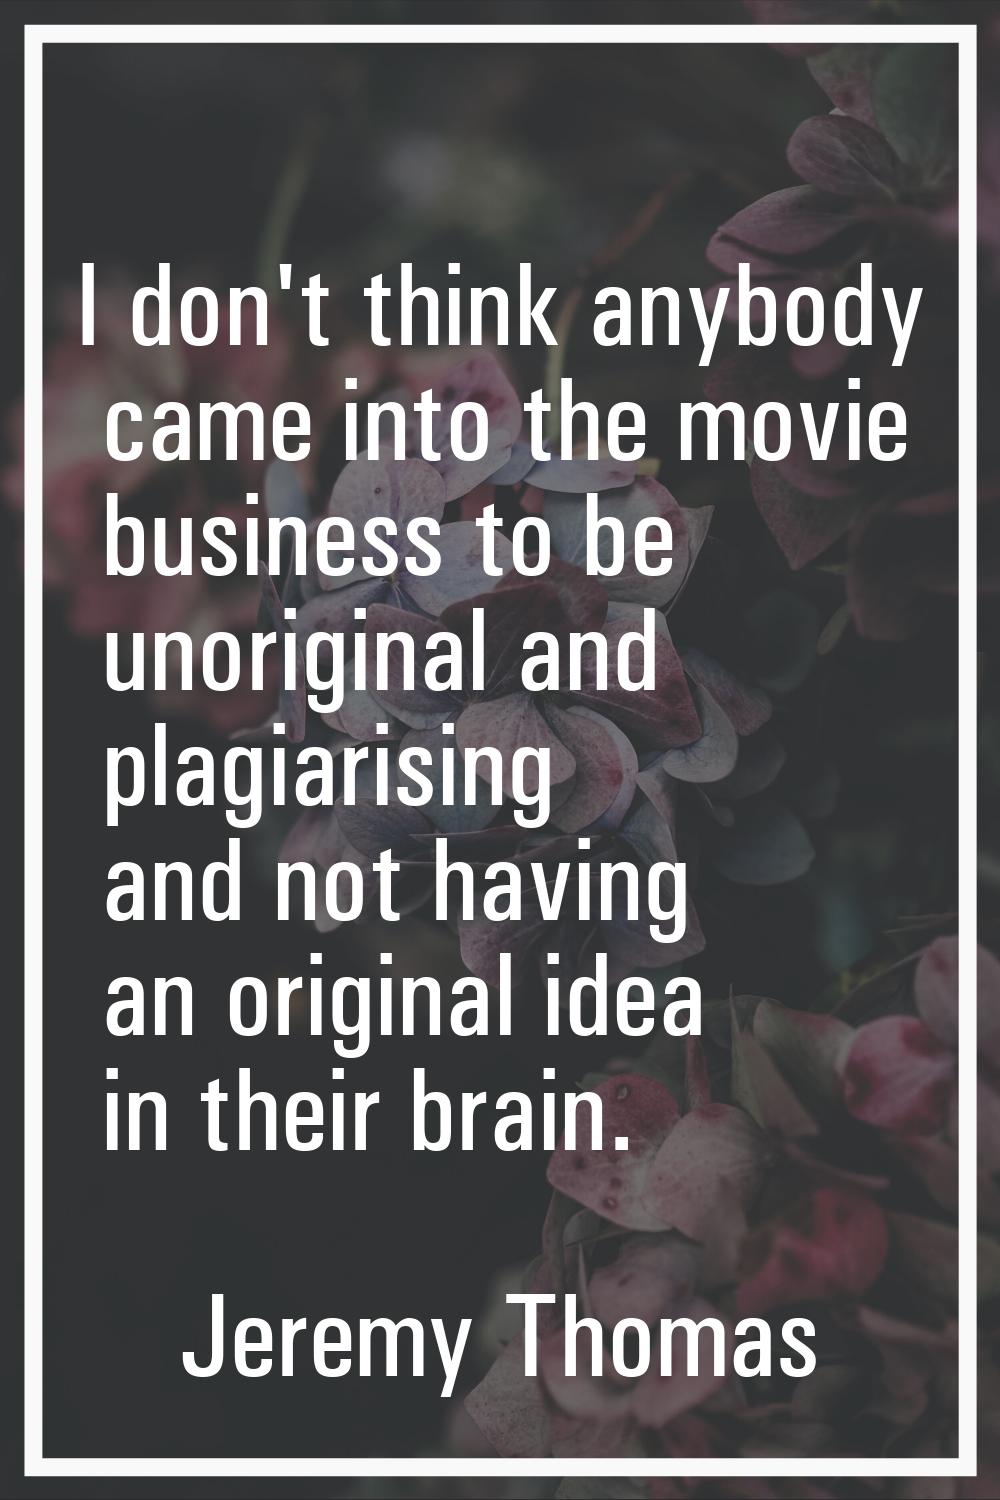 I don't think anybody came into the movie business to be unoriginal and plagiarising and not having